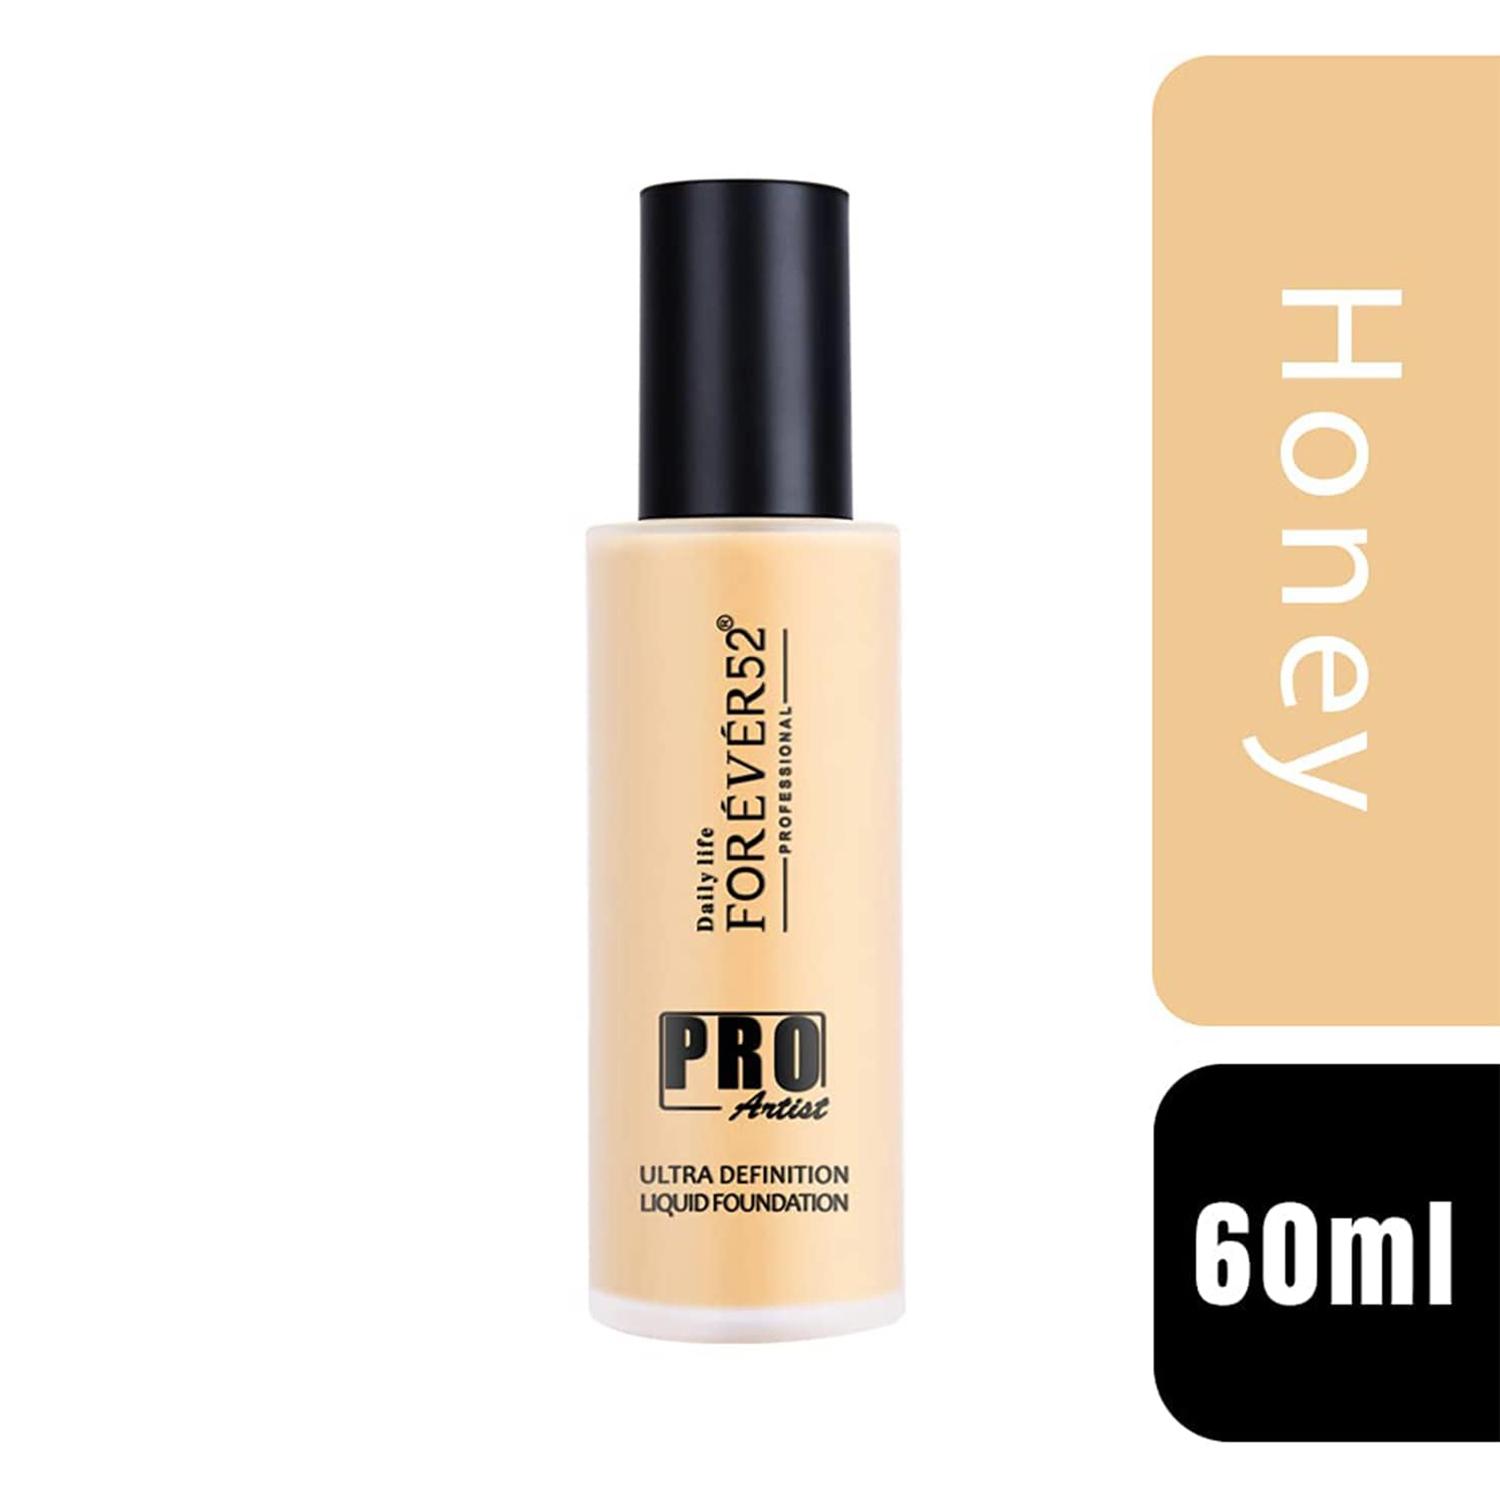 Daily Life Forever52 | Daily Life Forever52 Pro Artist Ultra Definition Liquid Foundation BUF007 - Honey (60ml)